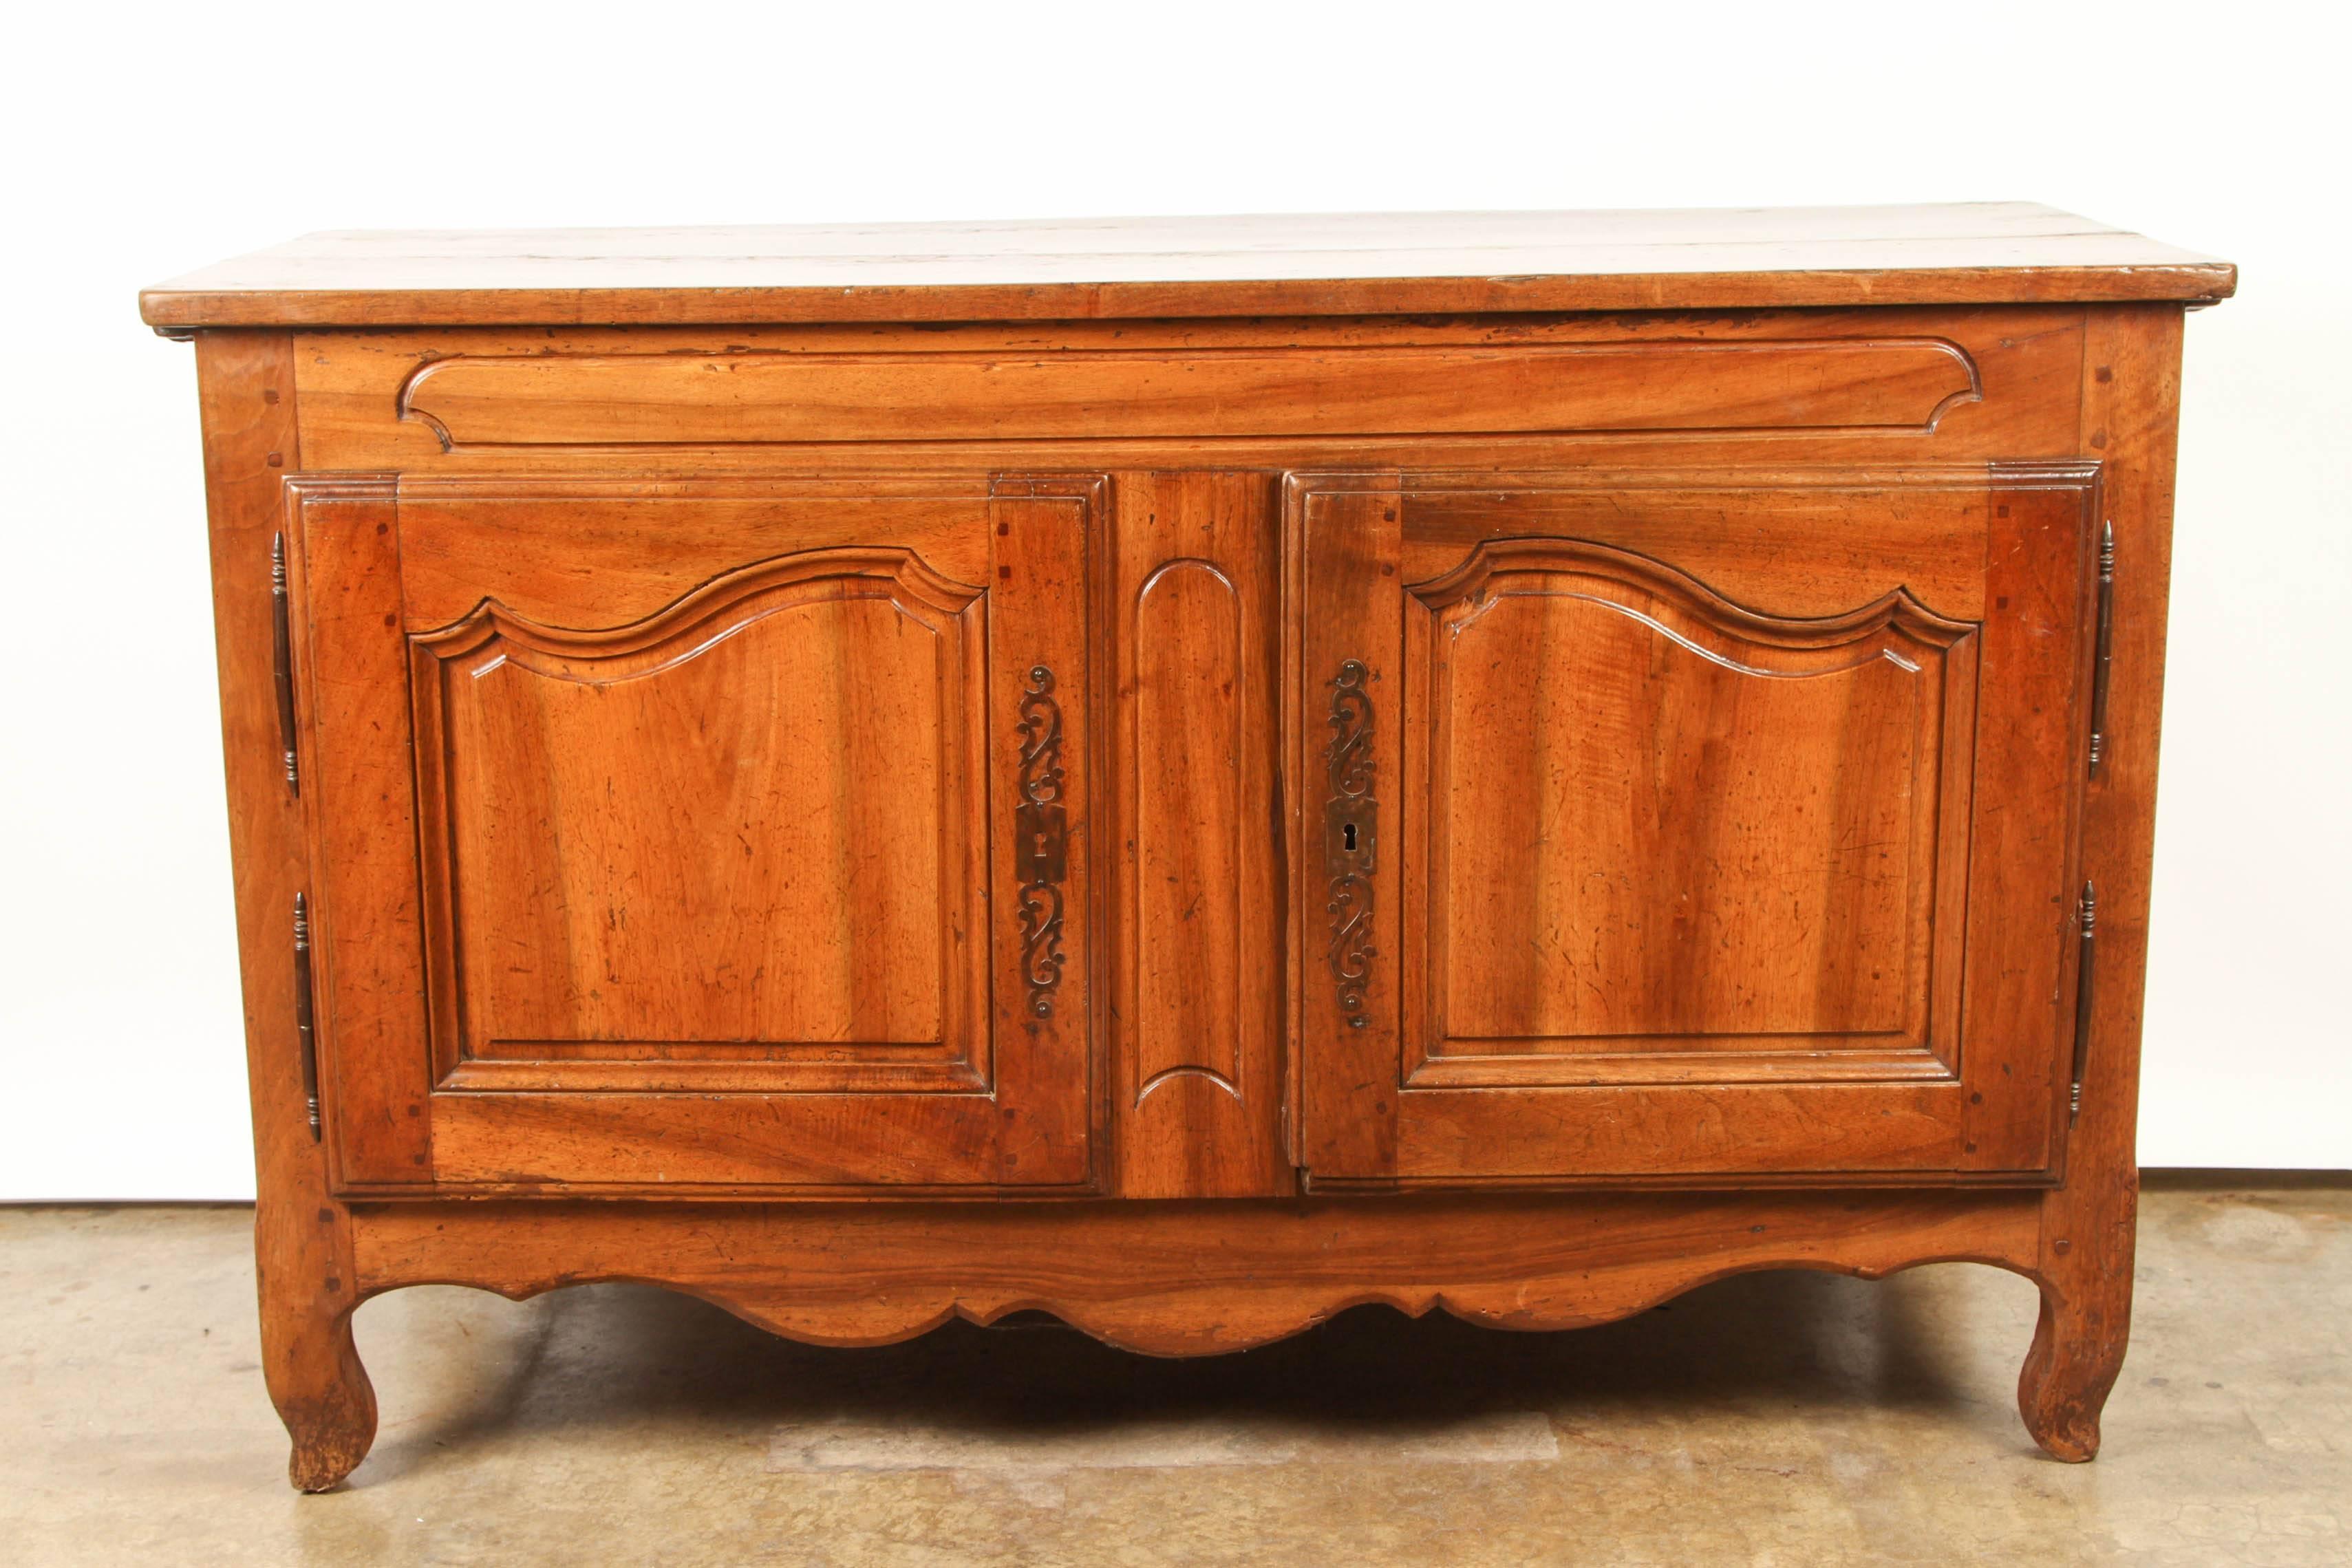 French Provincial Sideboard in walnut. Nice patina overall. Two inset doors open to a single compartment divided by a singe shelf.